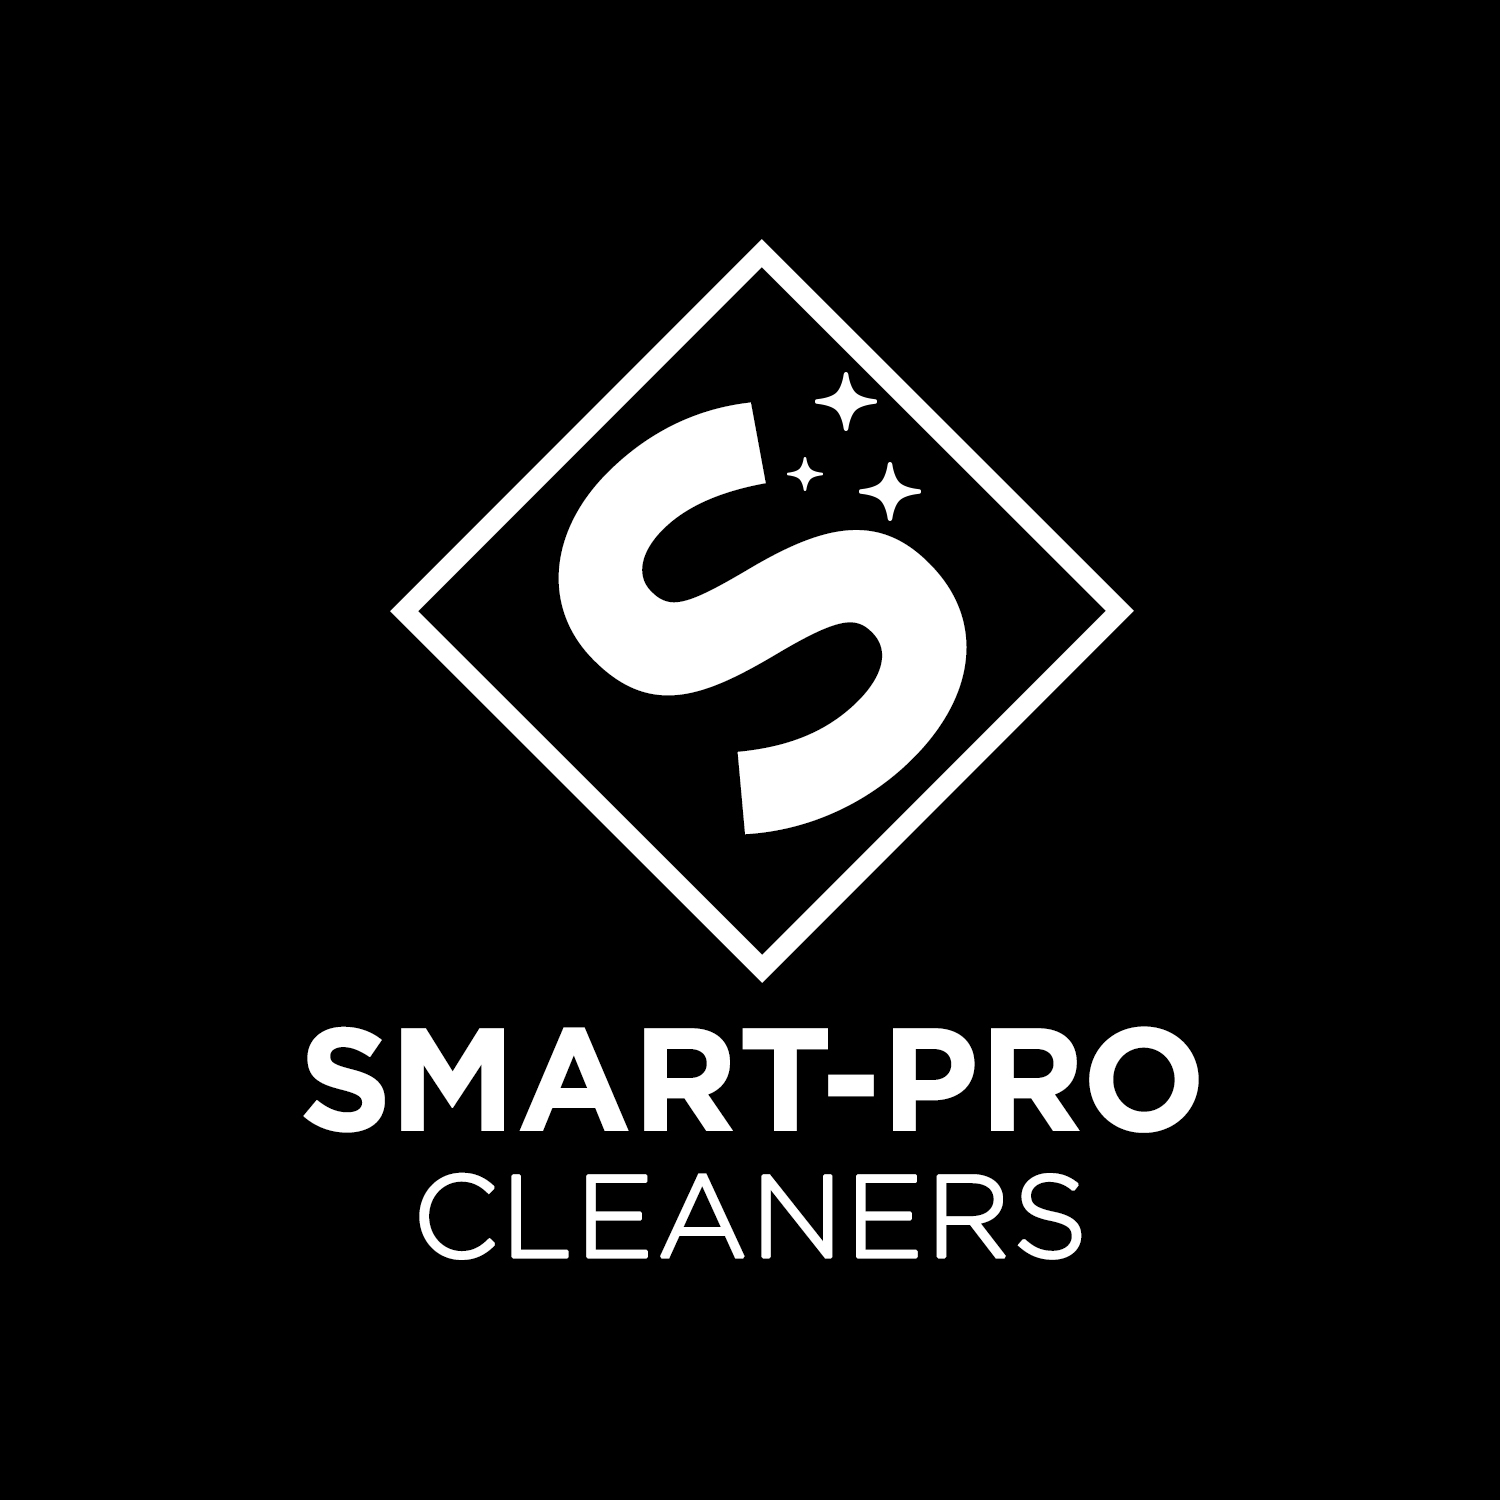 SMART-PRO CLEANERS